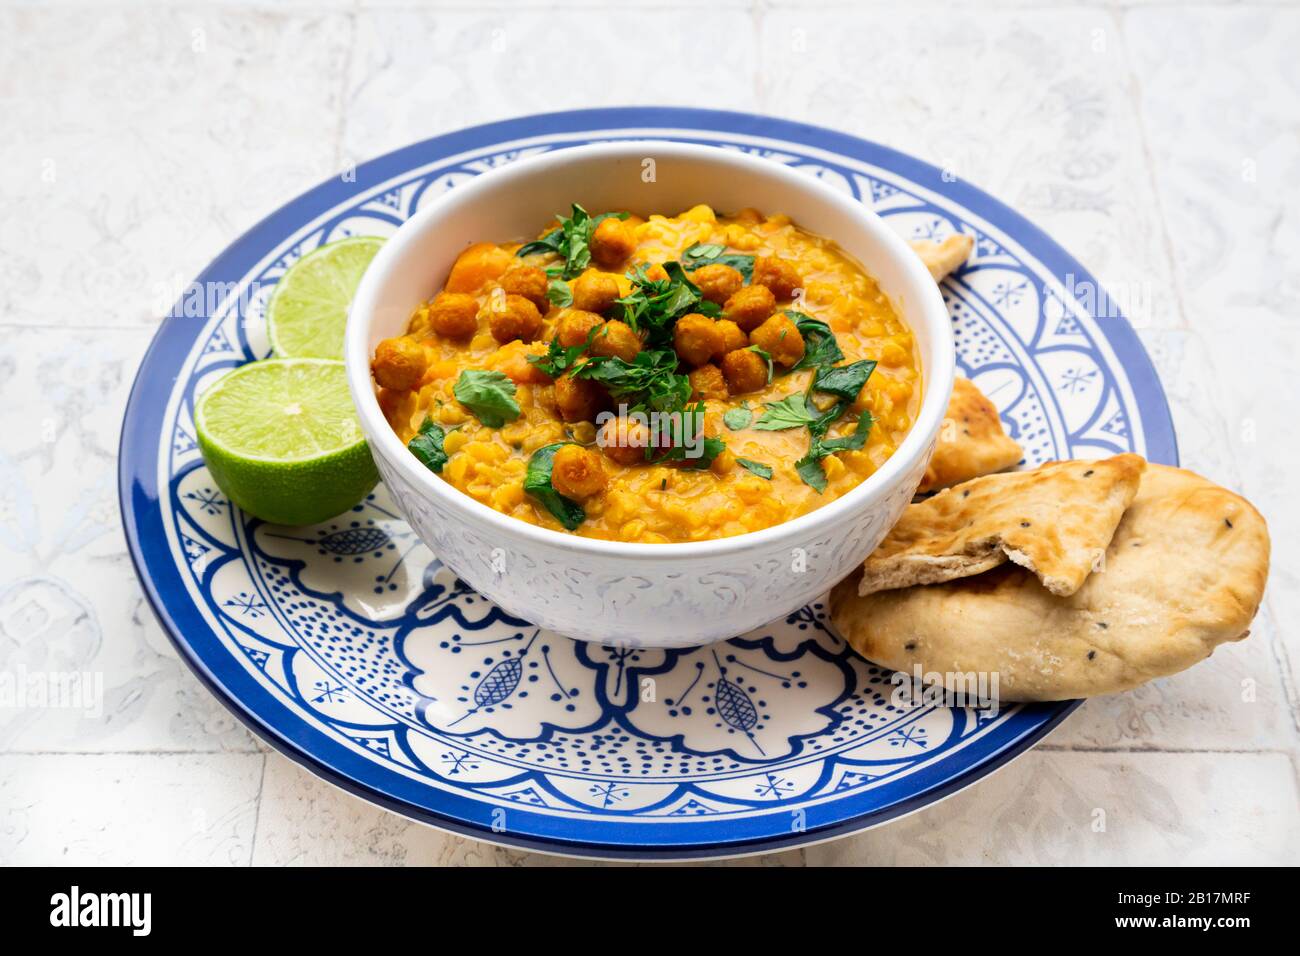 Vegan lentil curry with red lentils, sweet potatoes, spinach, roasted turmeric, chickpeas, with lime juice and coriander and naan bread Stock Photo